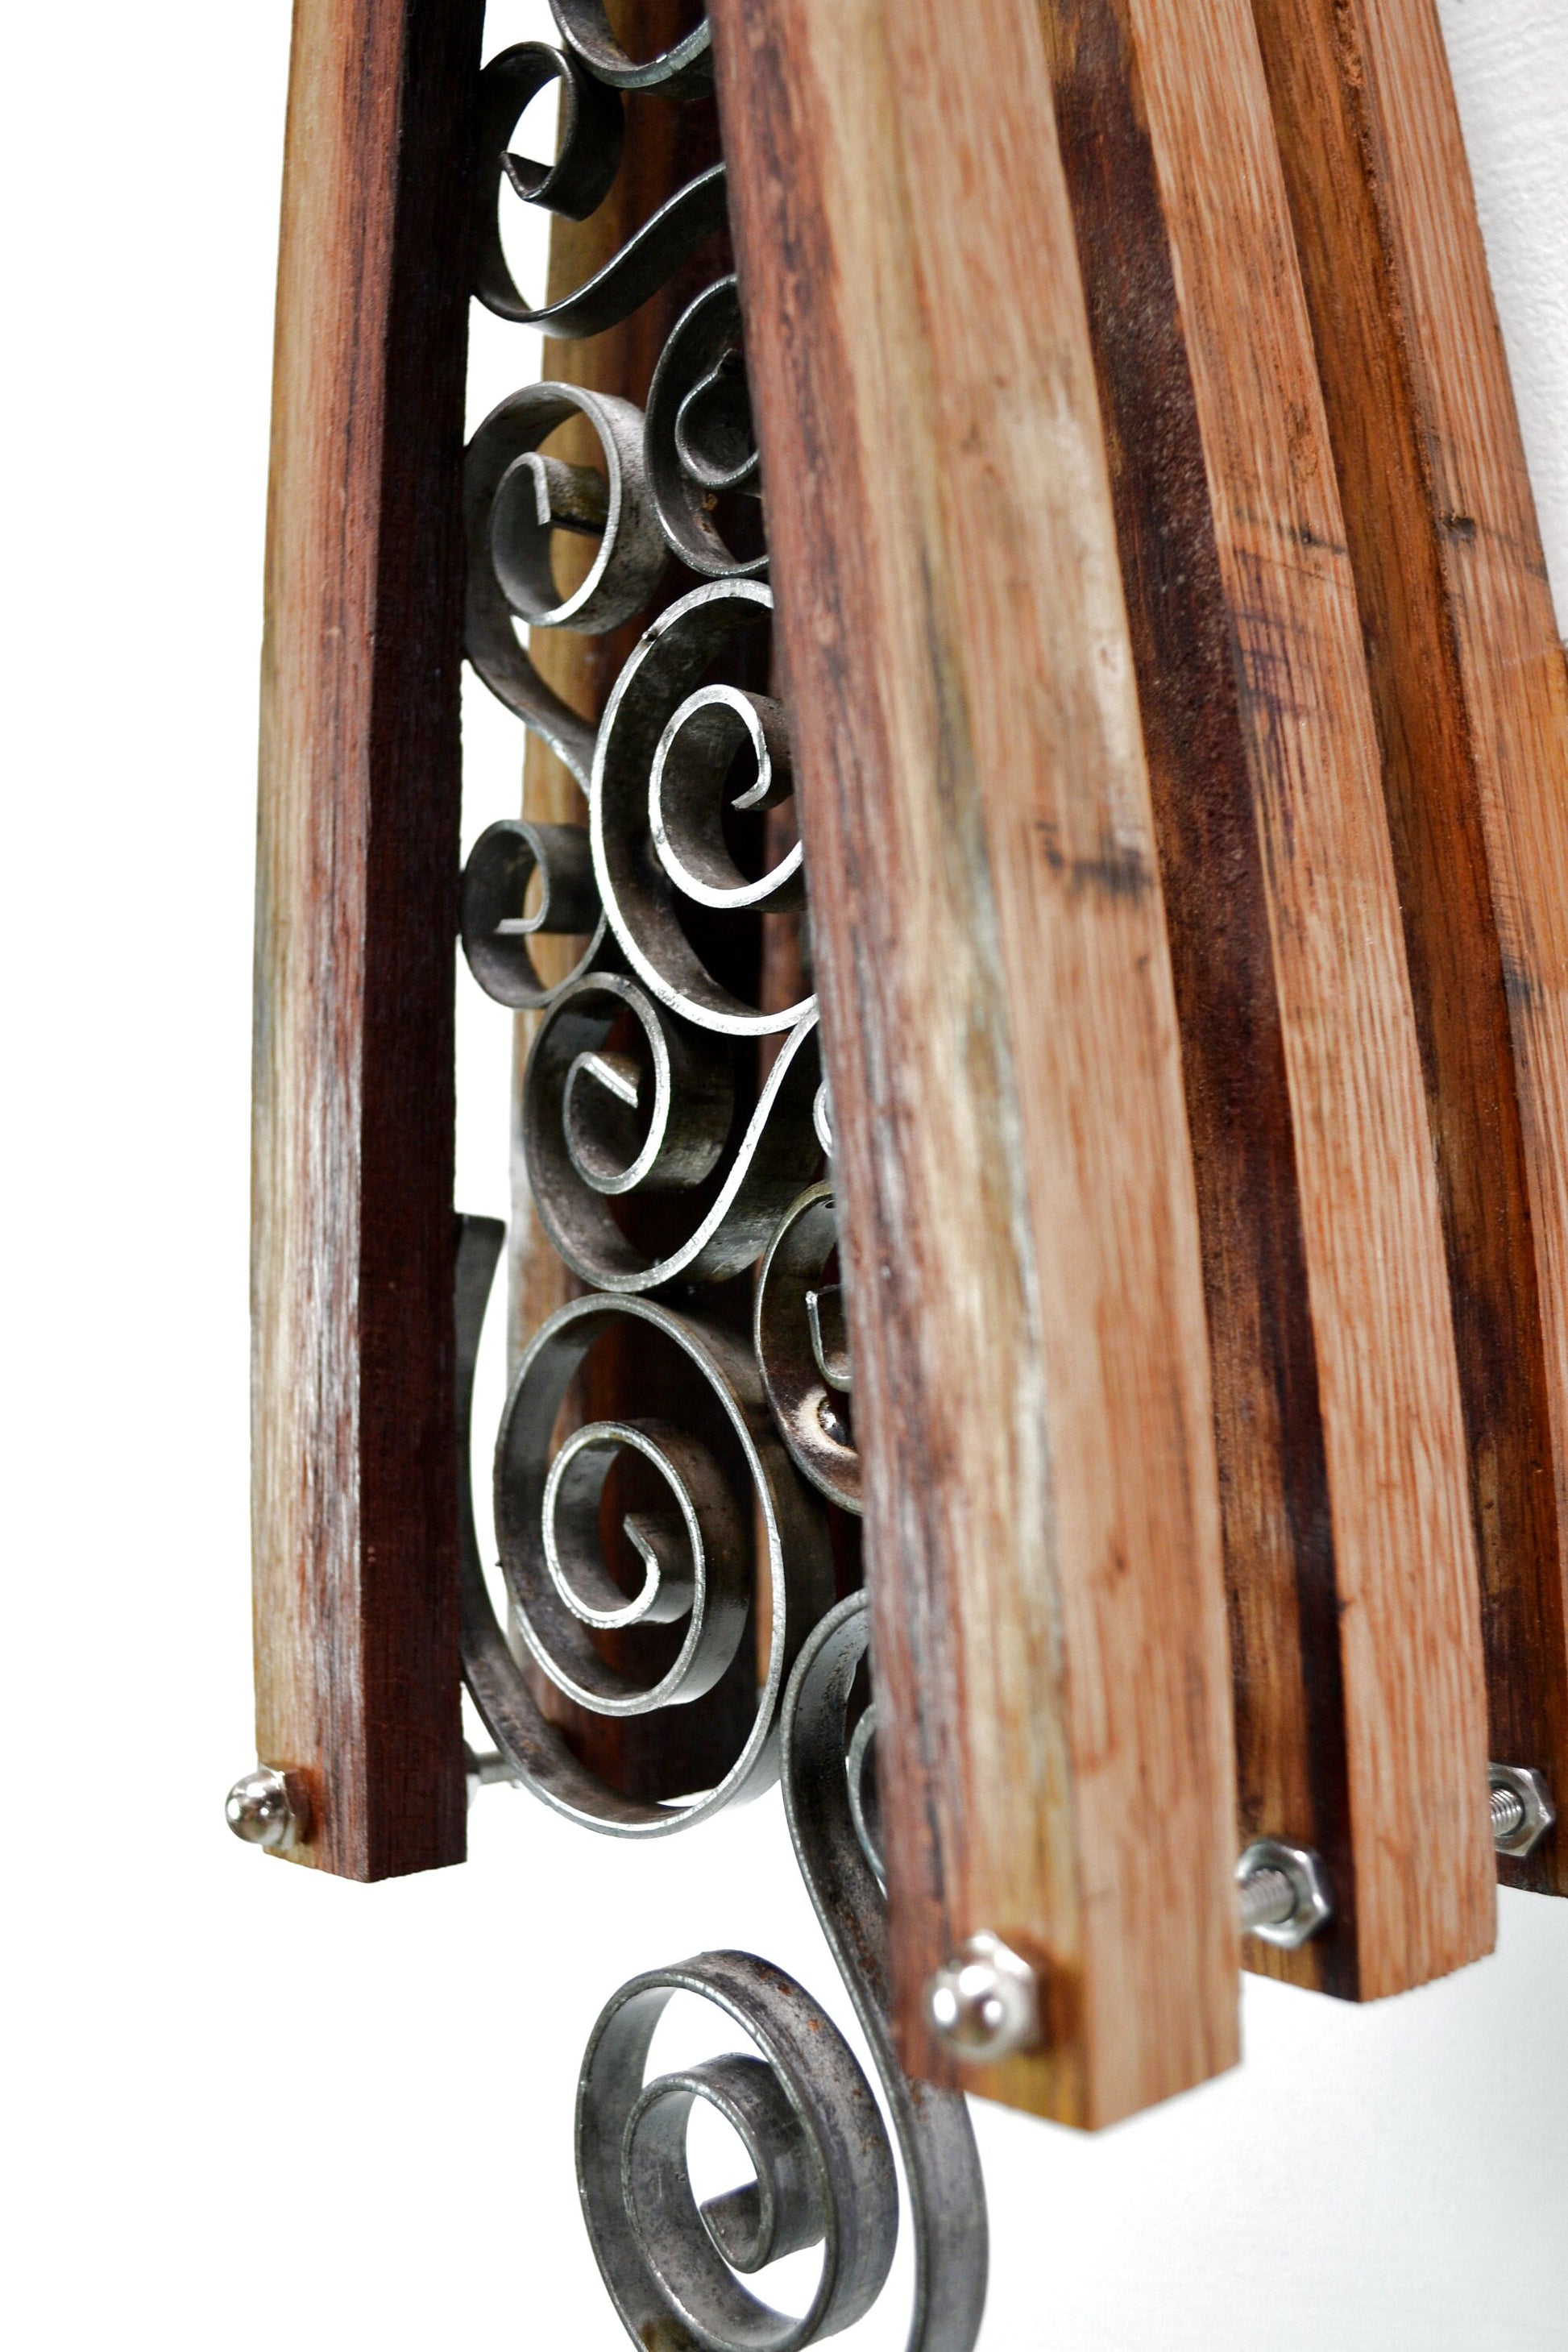 Wine Barrel Wall Sconce - Kirimito - Made from retired California wine barrels 100% Recycled!